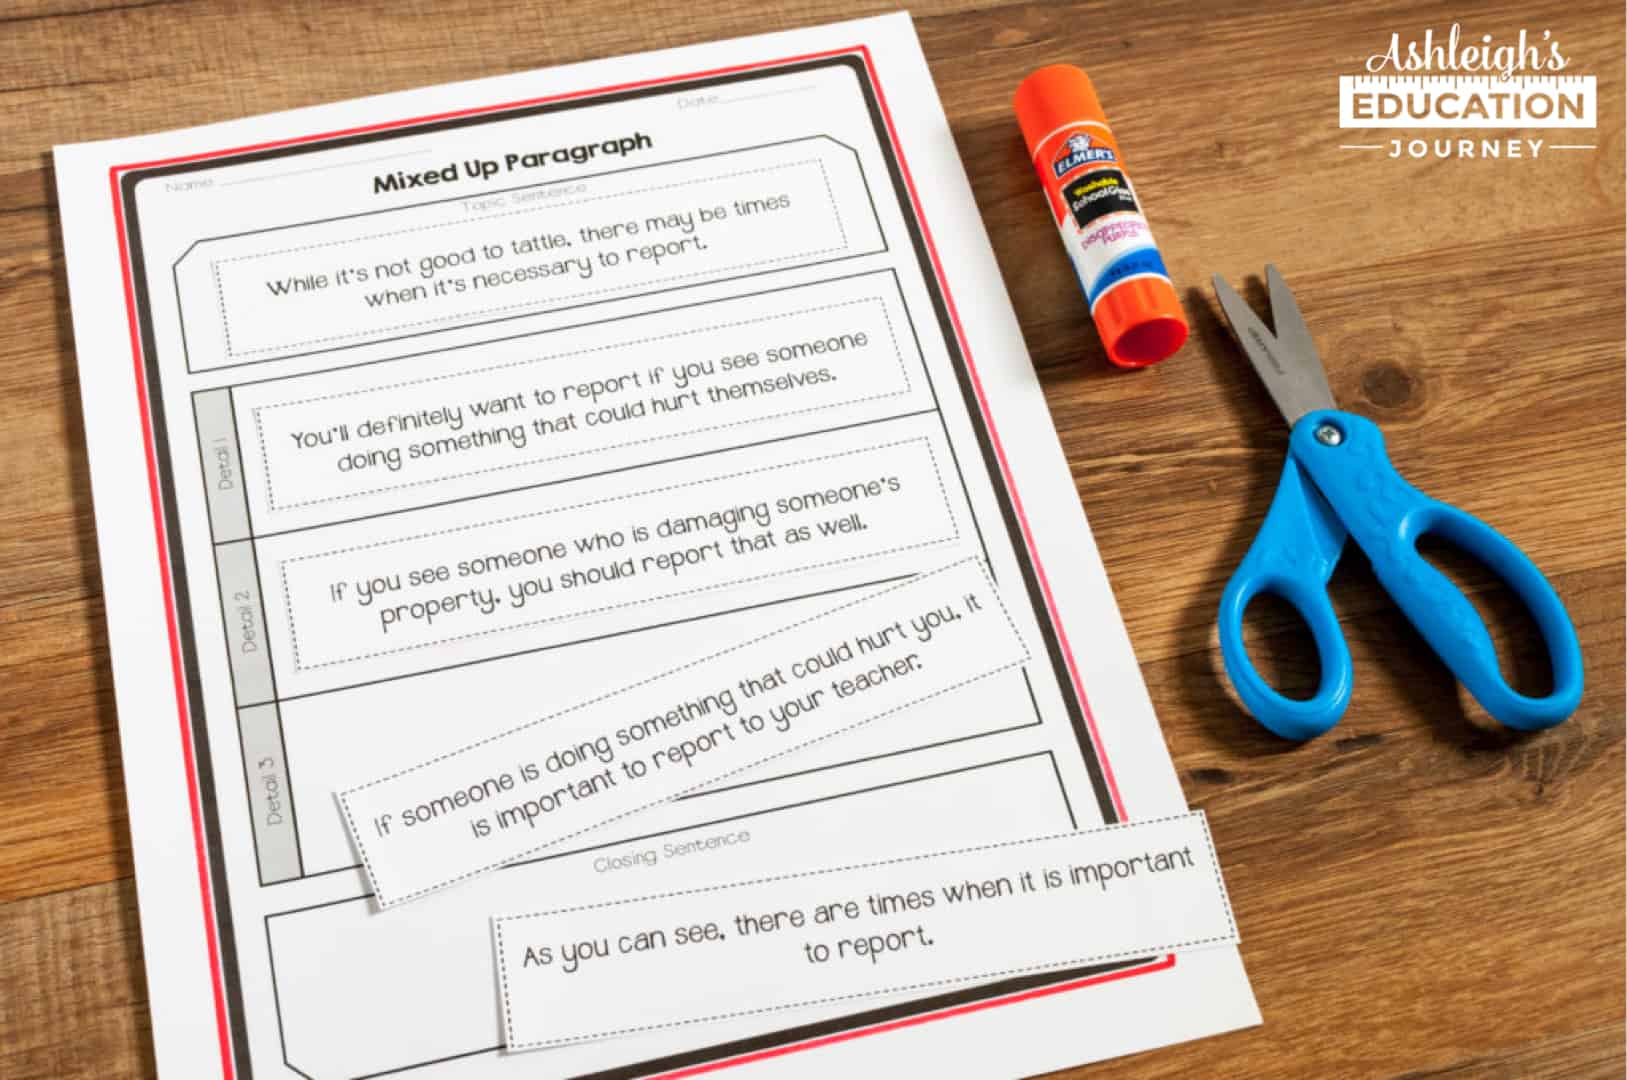 Use mixed up paragraphs to teach students how to organize paragraphs